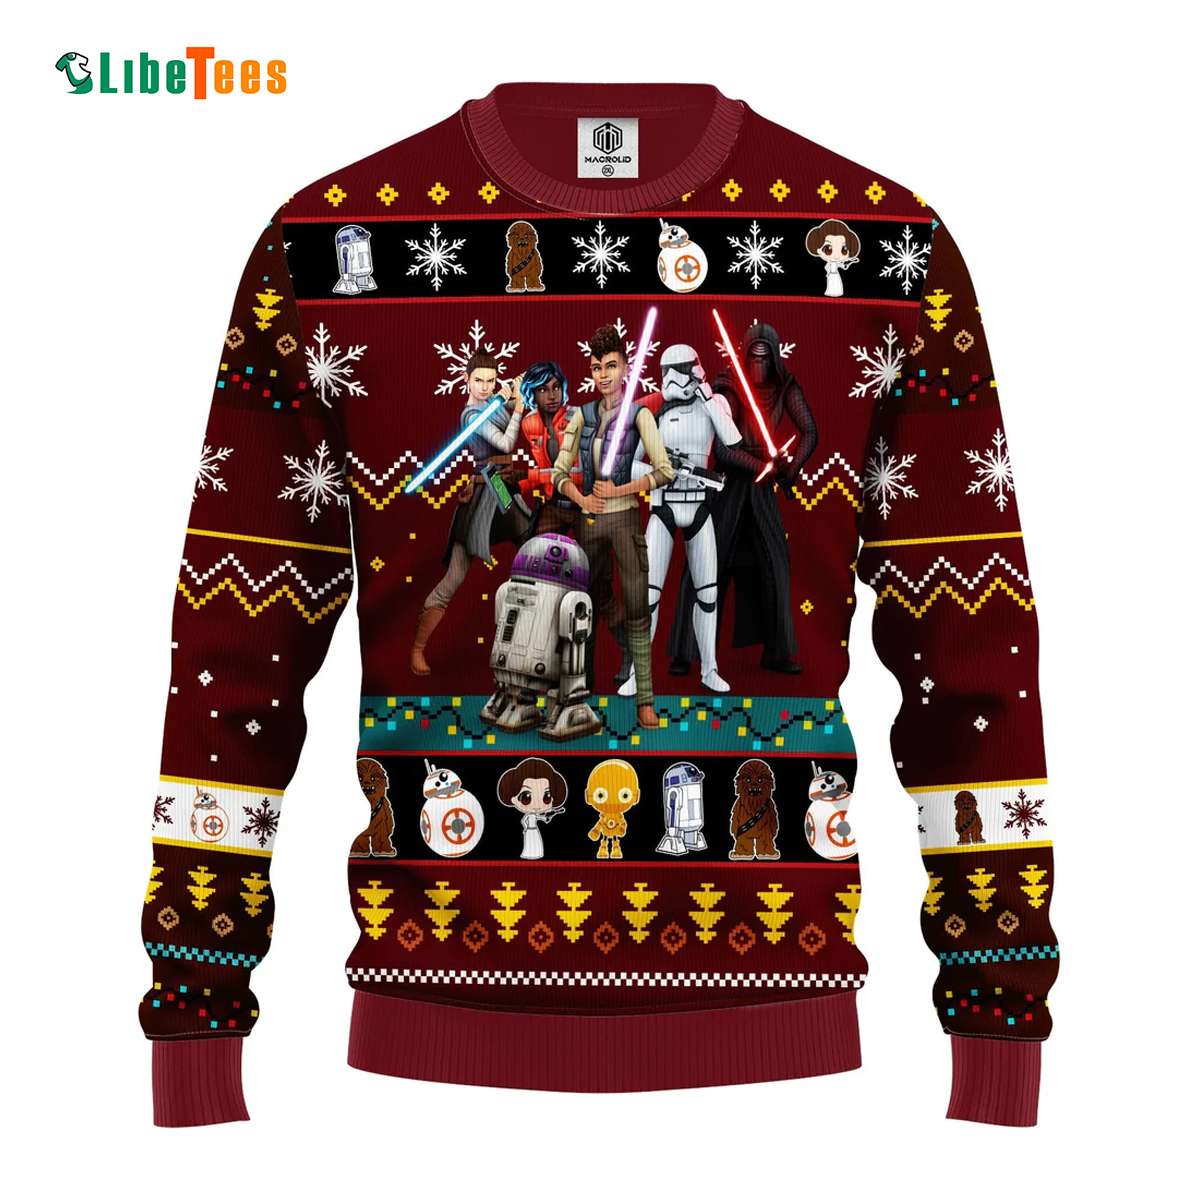 schoner Wind slang Dark R2 D2 Stormtrooper Darth Vader, Star Wars Ugly Christmas Sweater -  Perfect Gifts For Your Loved Ones